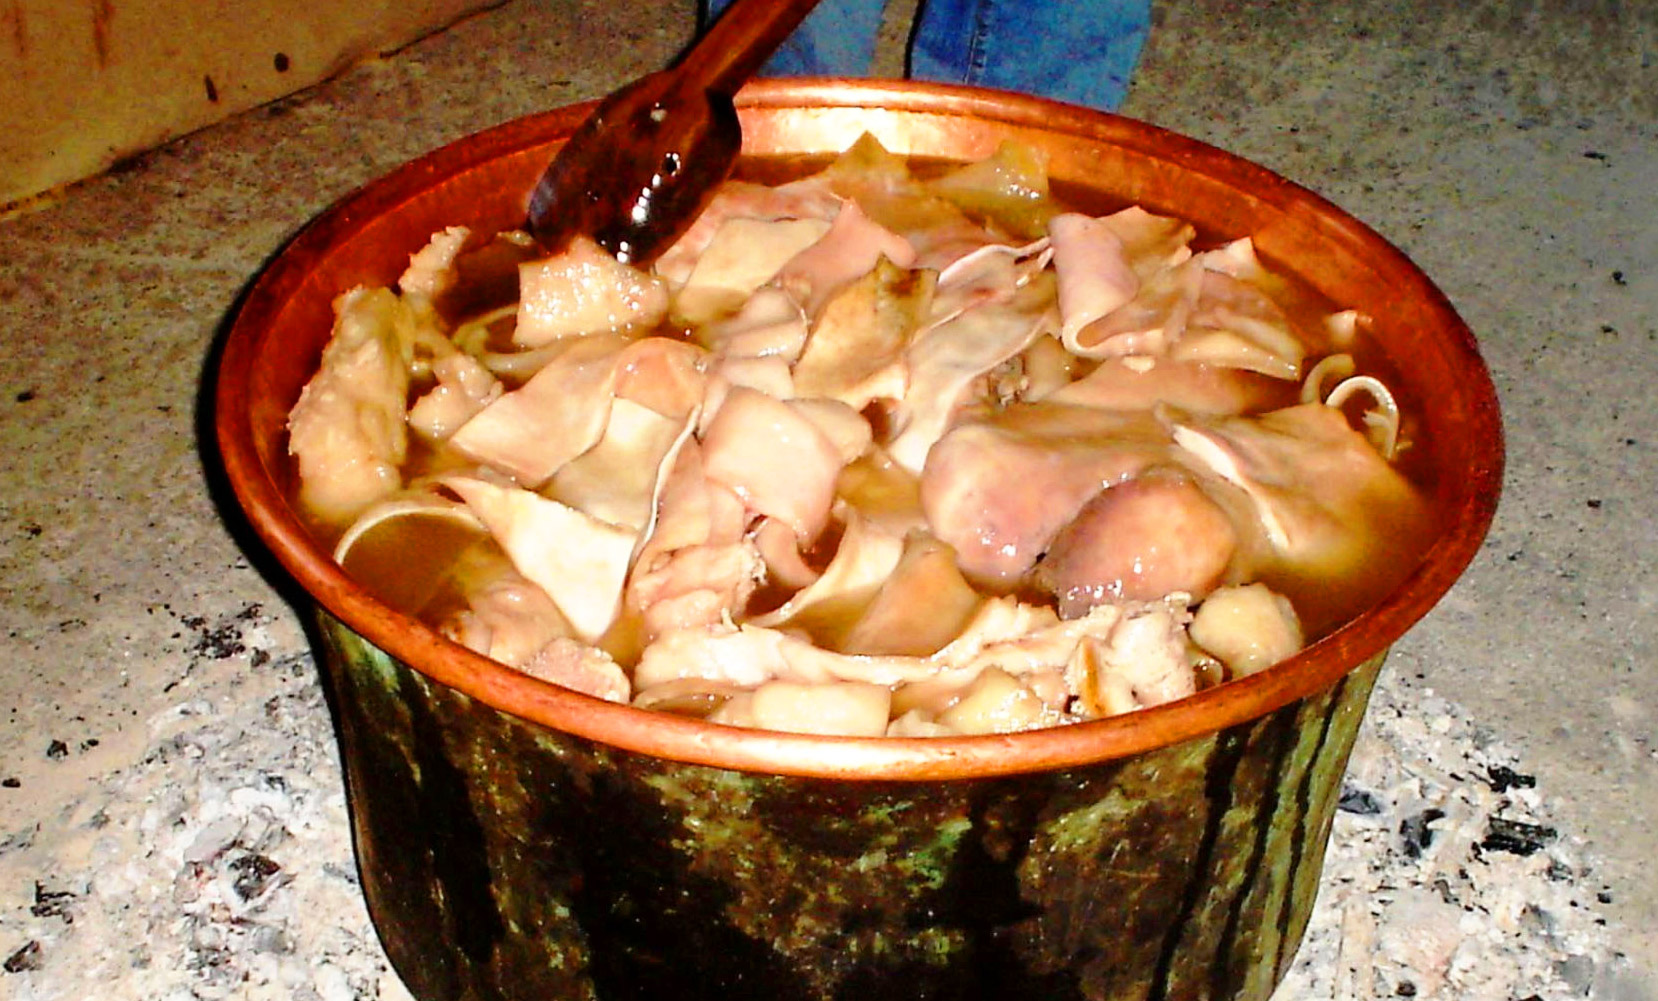 Friitole, der Schatz des Schweins- by Gino Larosa - http://it.wikipedia.org/wiki/File:Mammola_-_Frittole_nella_Cardara.JPG, CC BY-SA 2.5, https://commons.wikimedia.org/w/index.php?curid=8692896